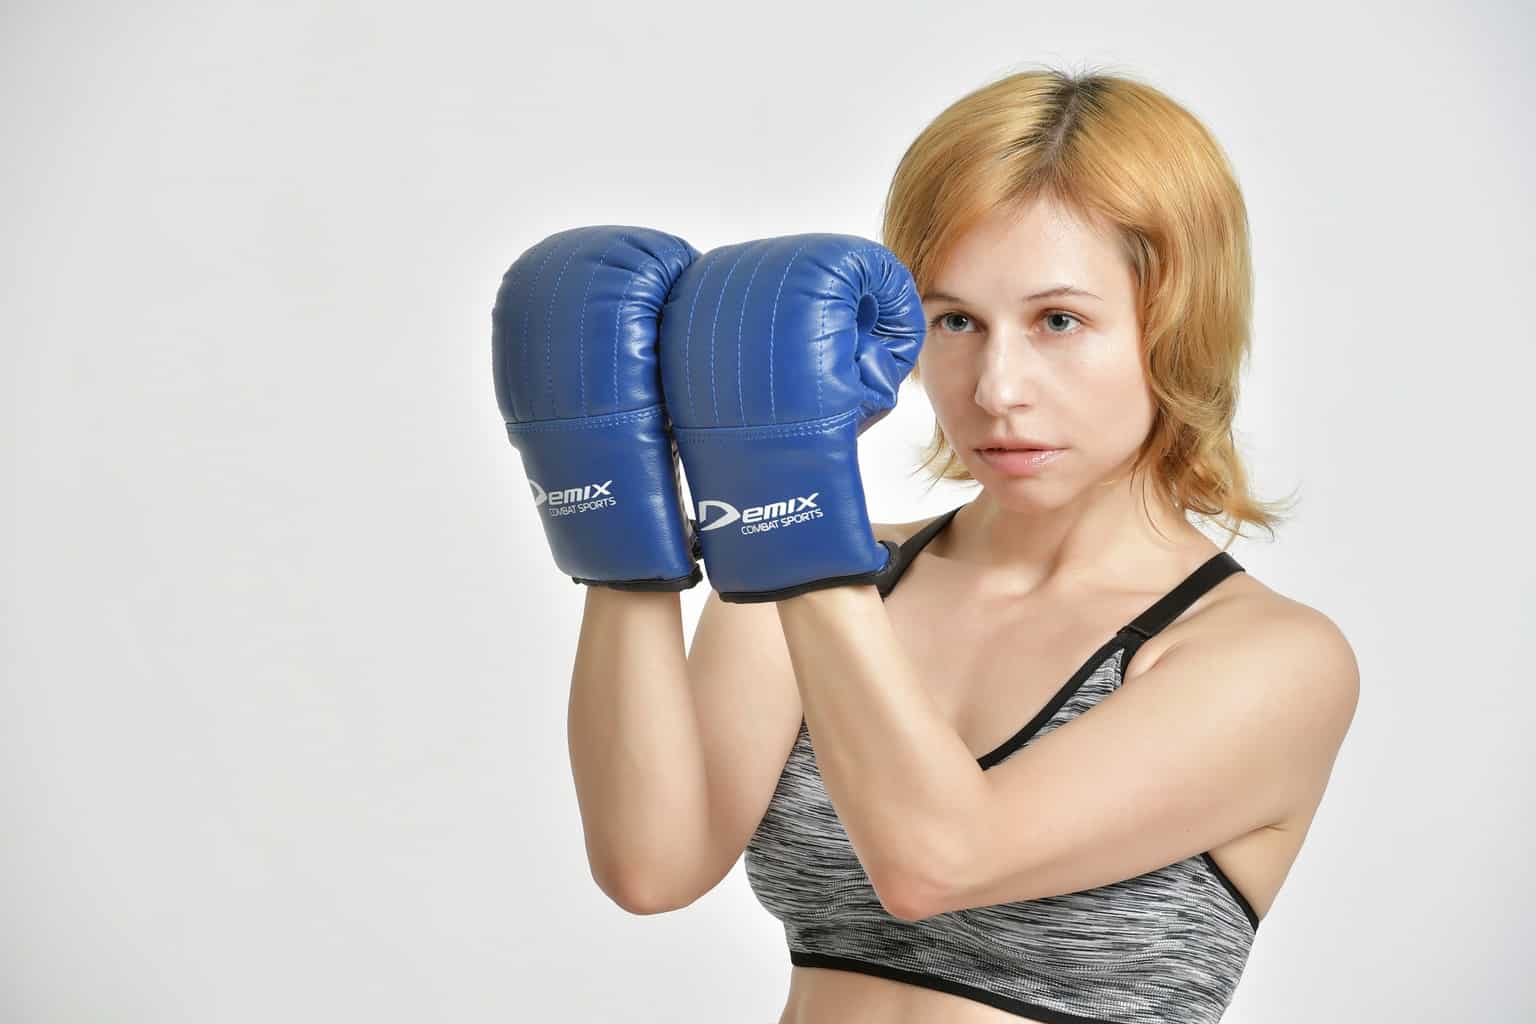 10 Kickboxing Benefits You Should Know